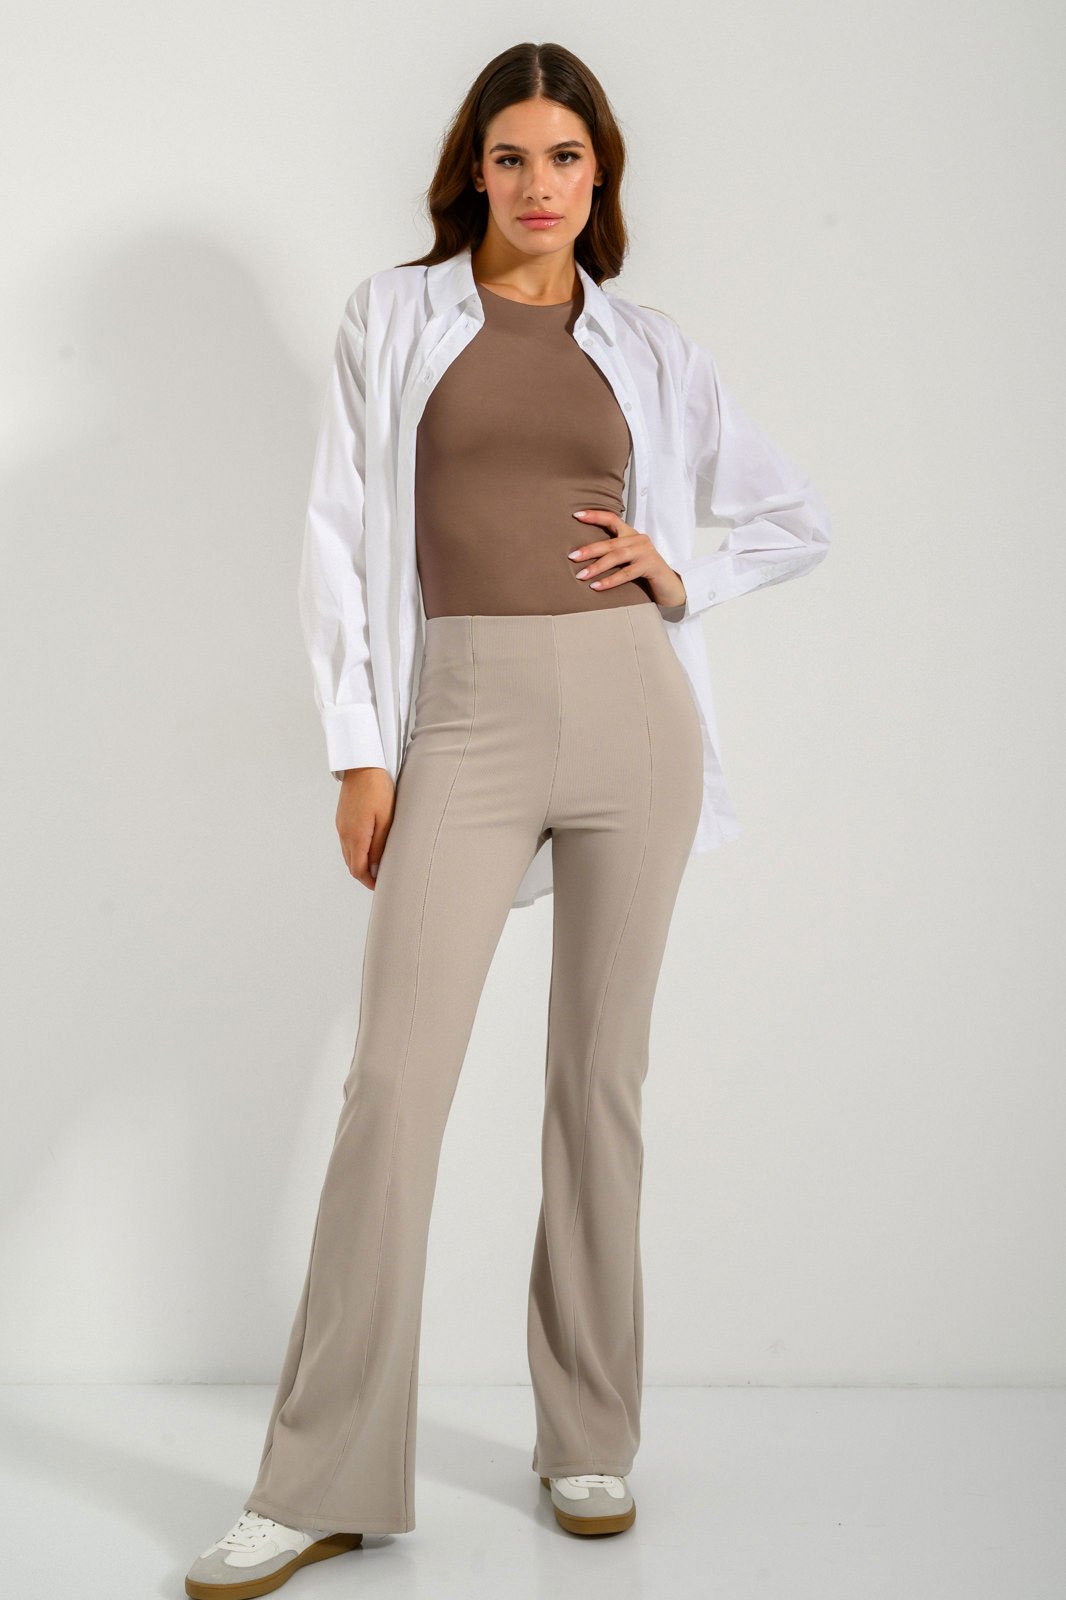 Ribbed Flare Trouser Pants